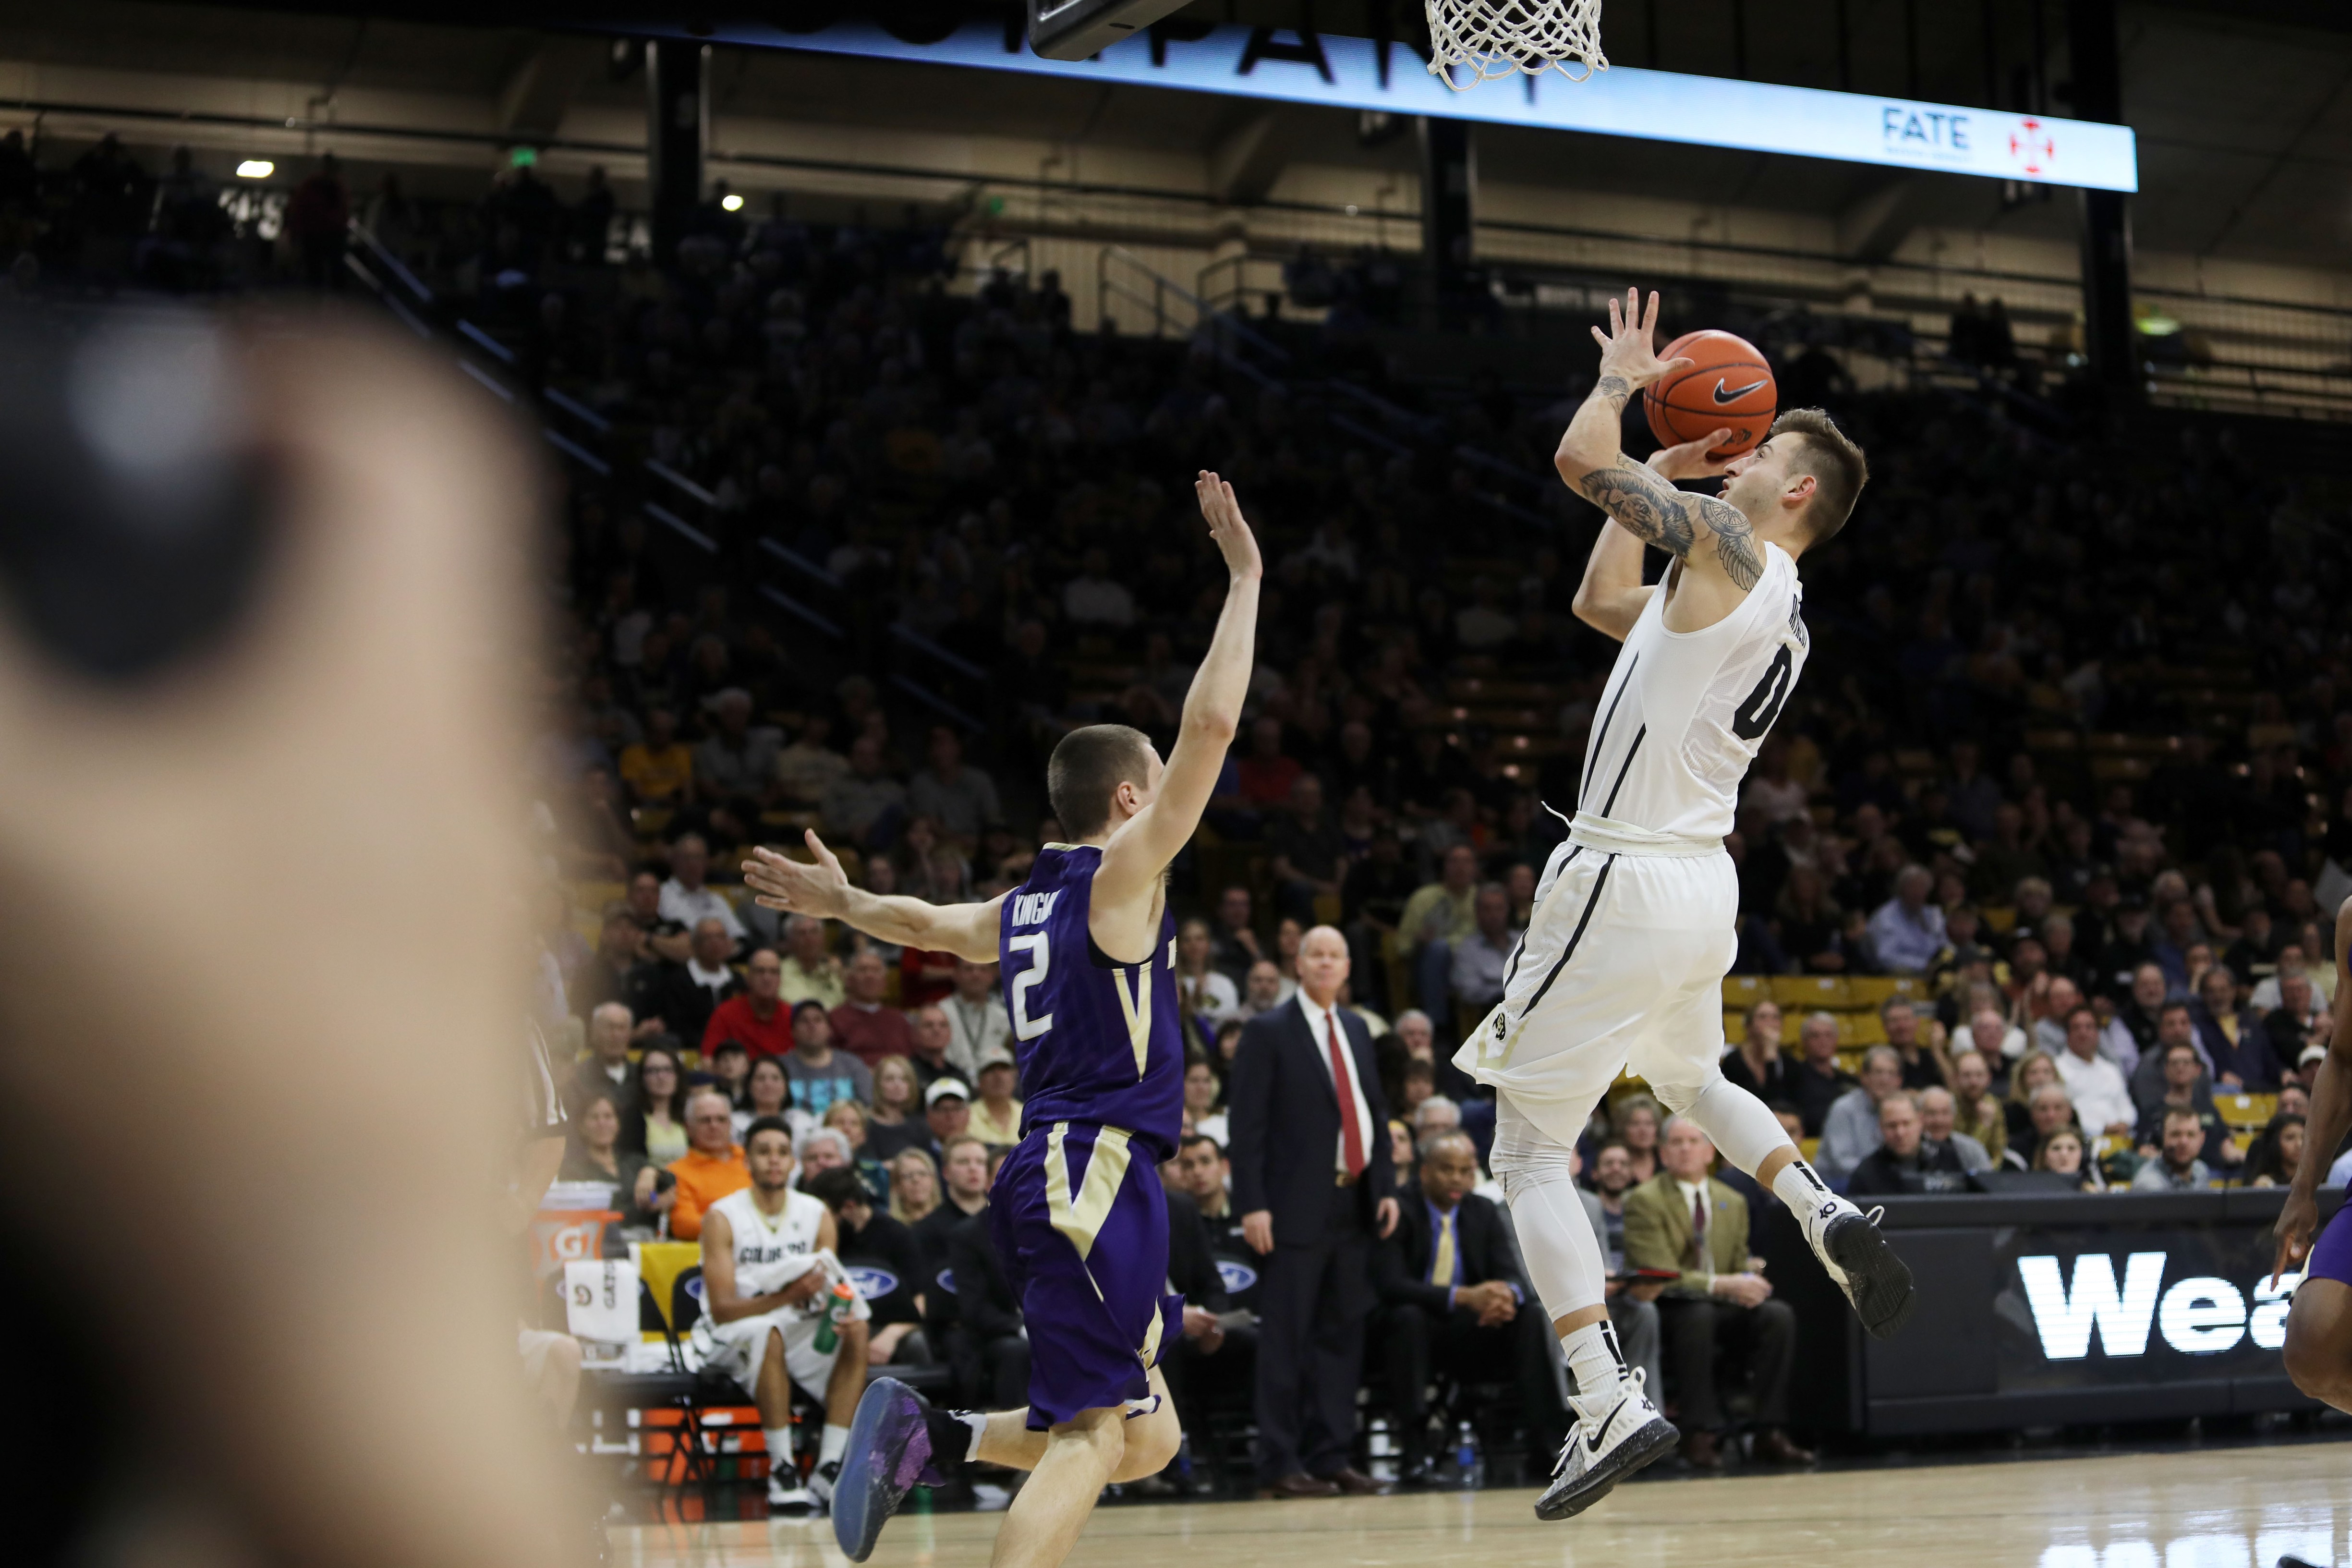 Colorado’s bench steps up as fouls and turnovers doom Huskies